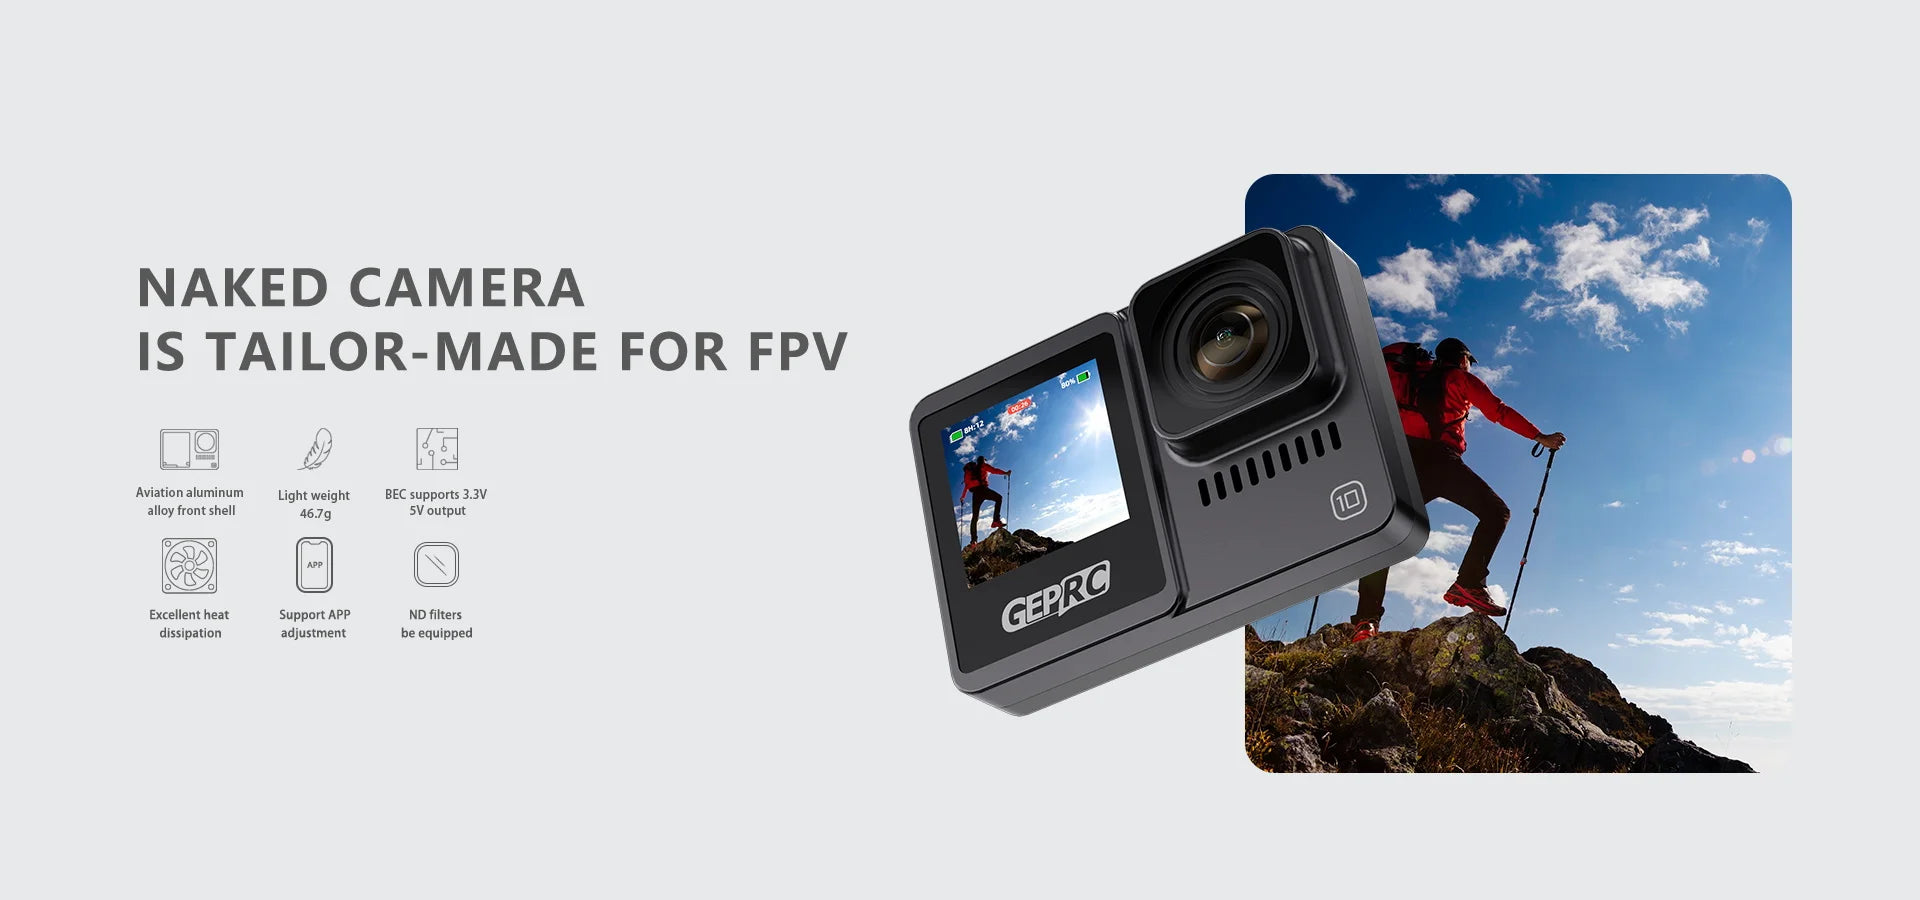 GEPRC Naked Camera, BEC supports 3.3V alloy front shell 46.7g SV output Excellent heat Support 